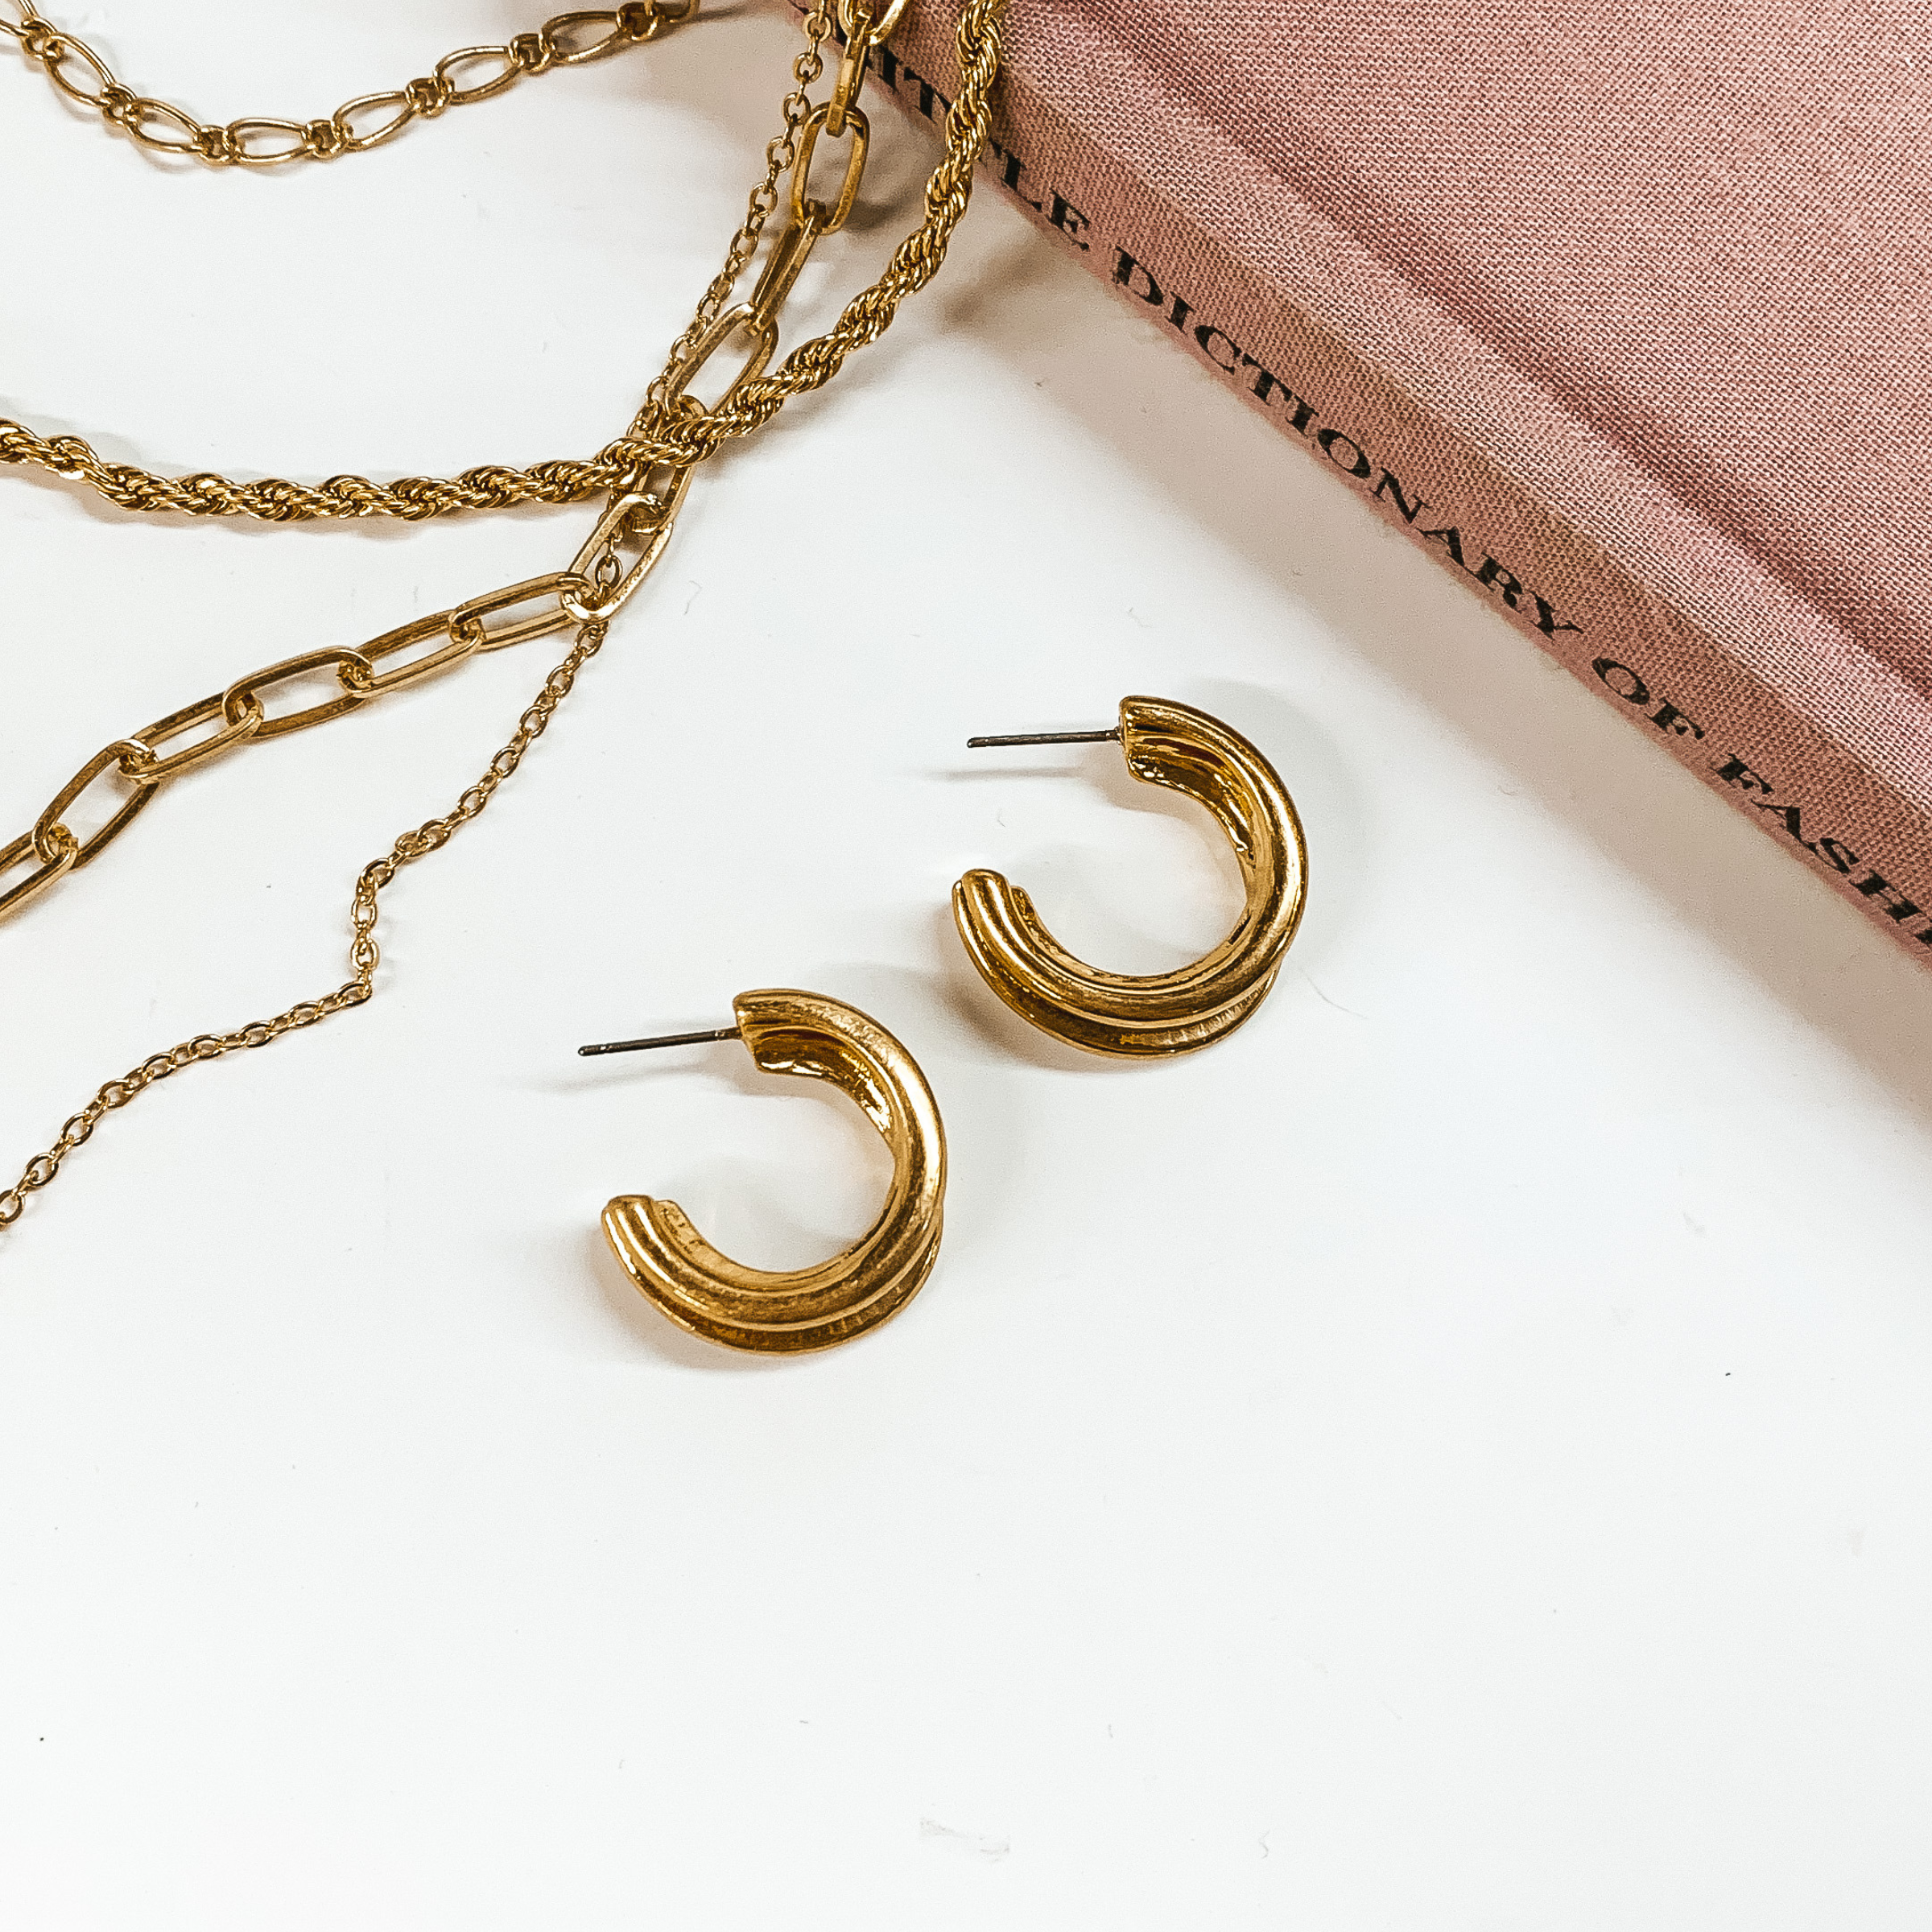 Layered Hoop Earrings in Gold Tone - Giddy Up Glamour Boutique